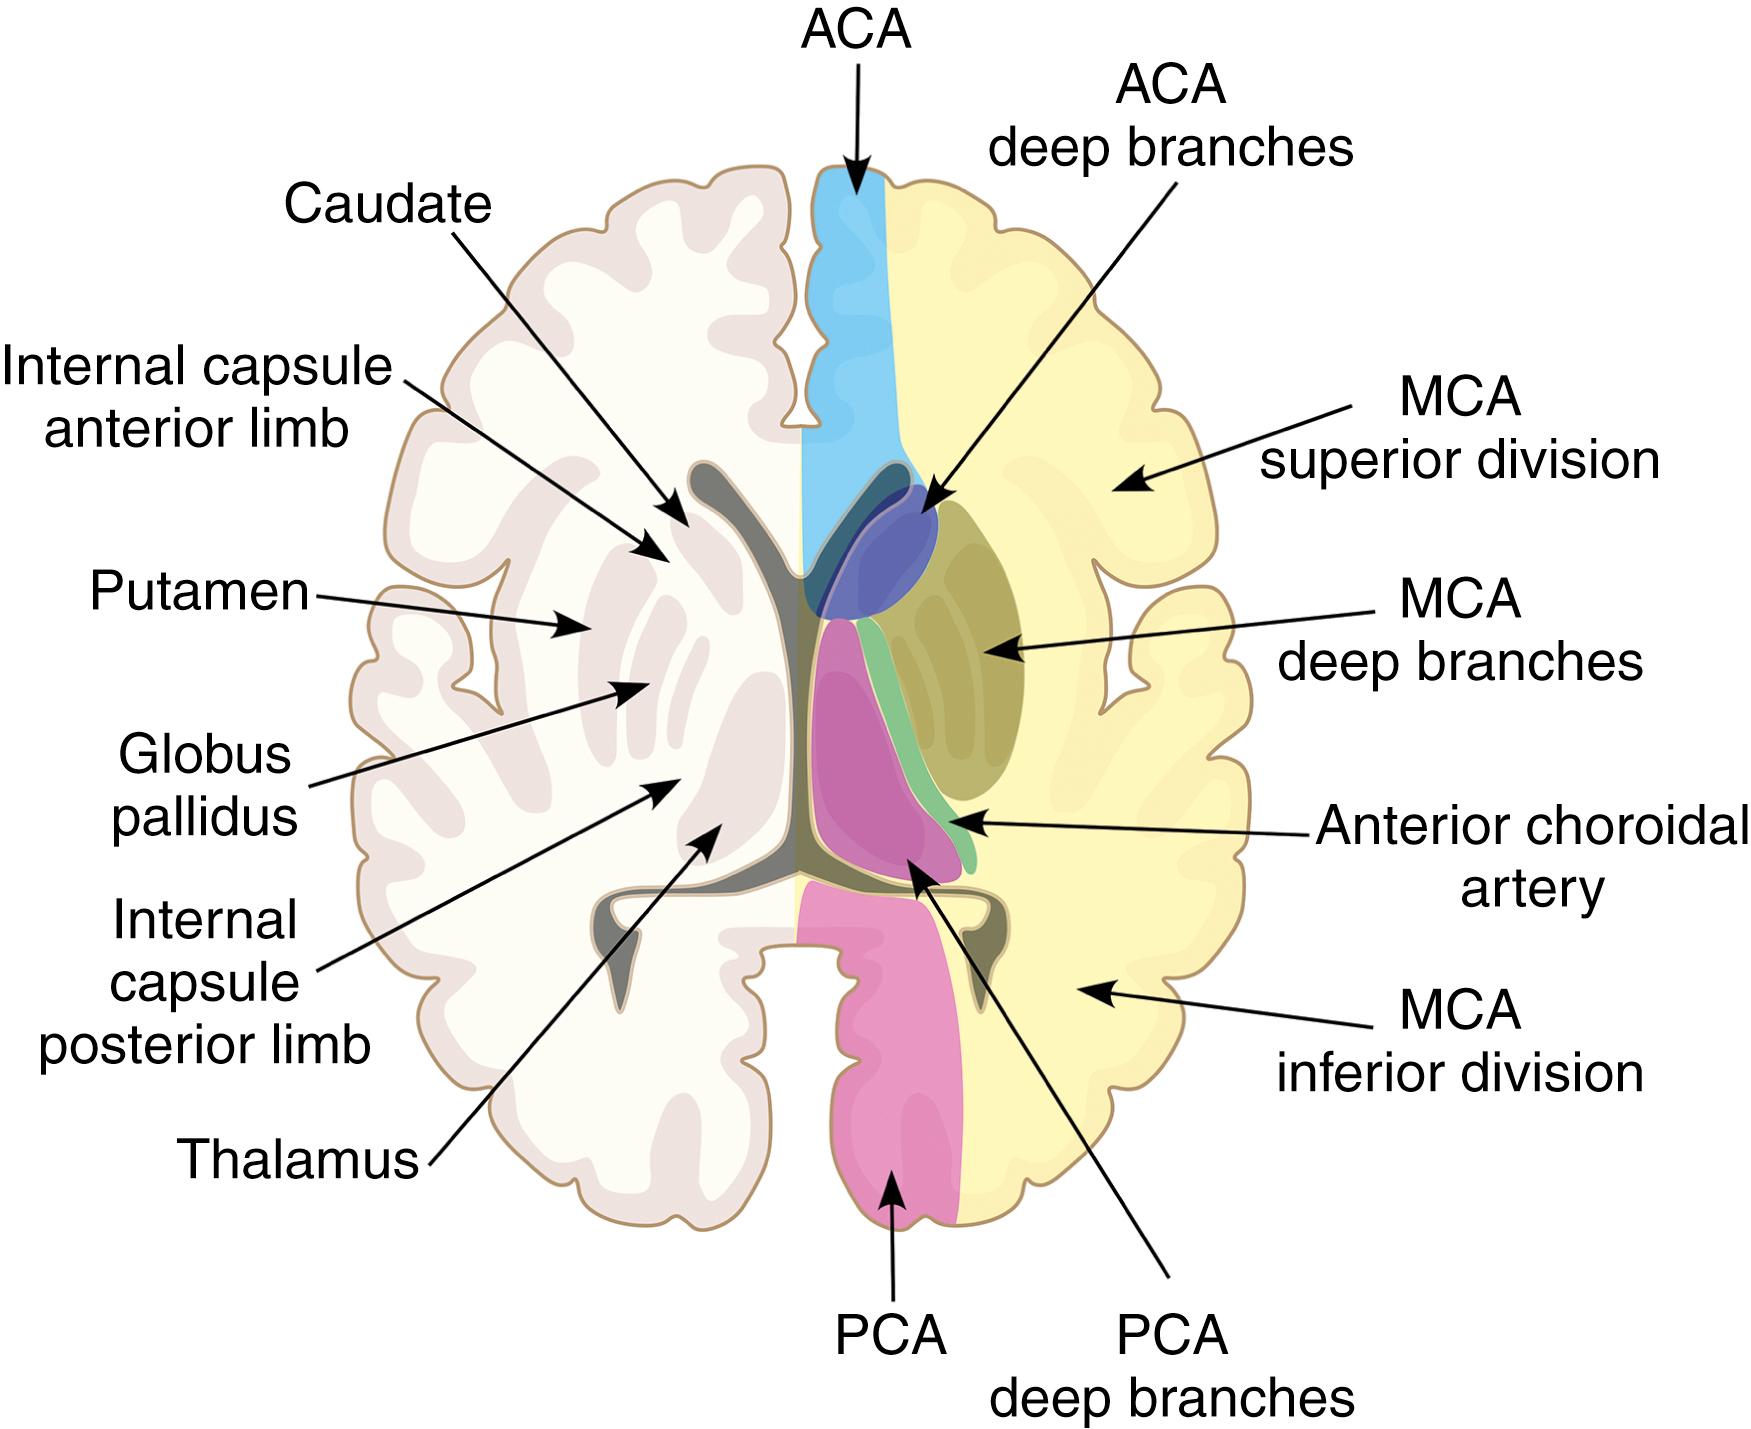 Fig. 37.3, Anatomic distribution of blood flow from major intracranial vessels in the cerebral hemispheres. ACA, anterior cerebral artery; MCA, middle cerebral artery; PCA, posterior cerebral artery.